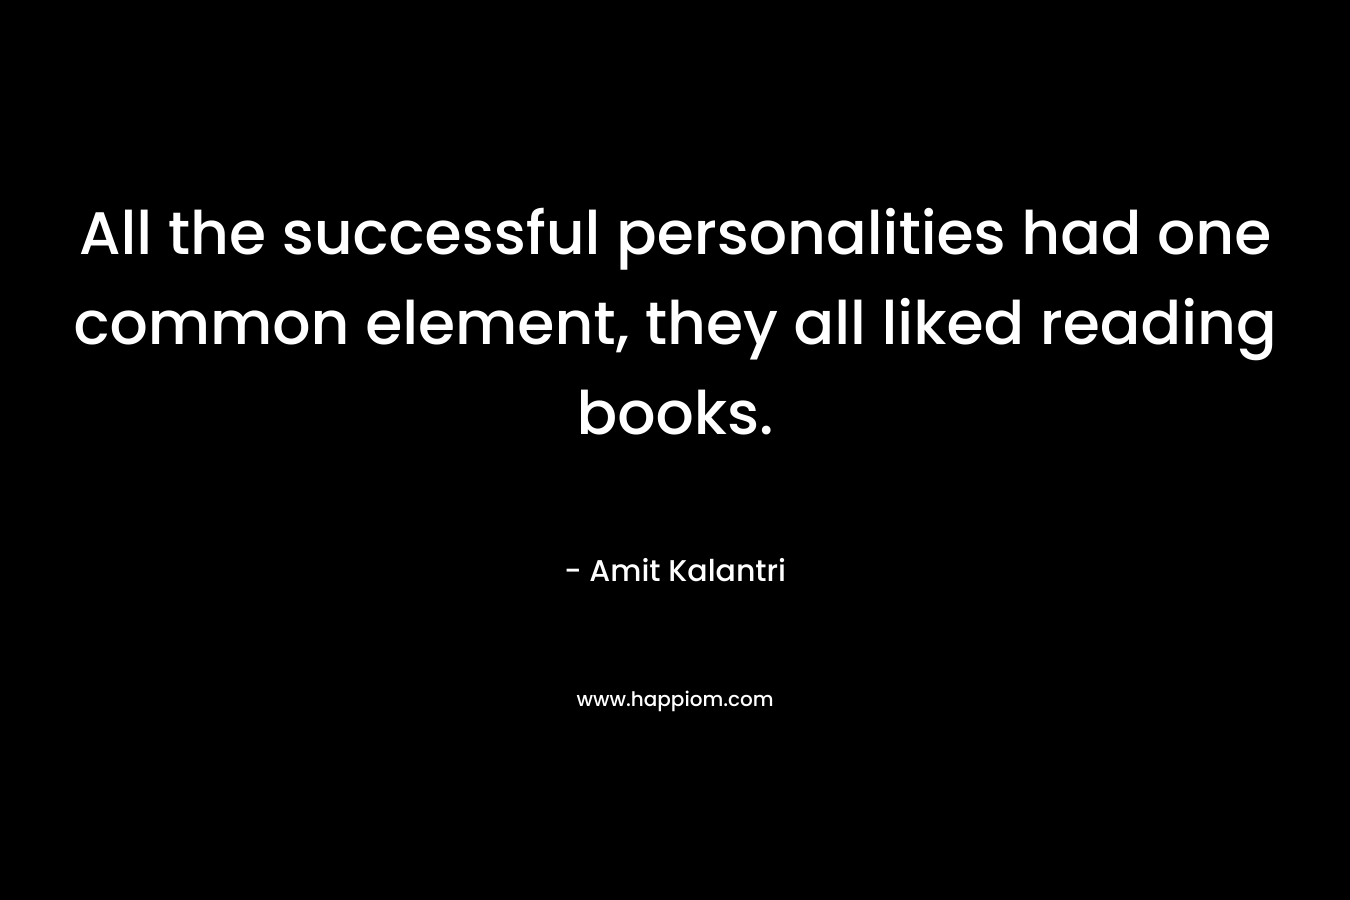 All the successful personalities had one common element, they all liked reading books. – Amit Kalantri